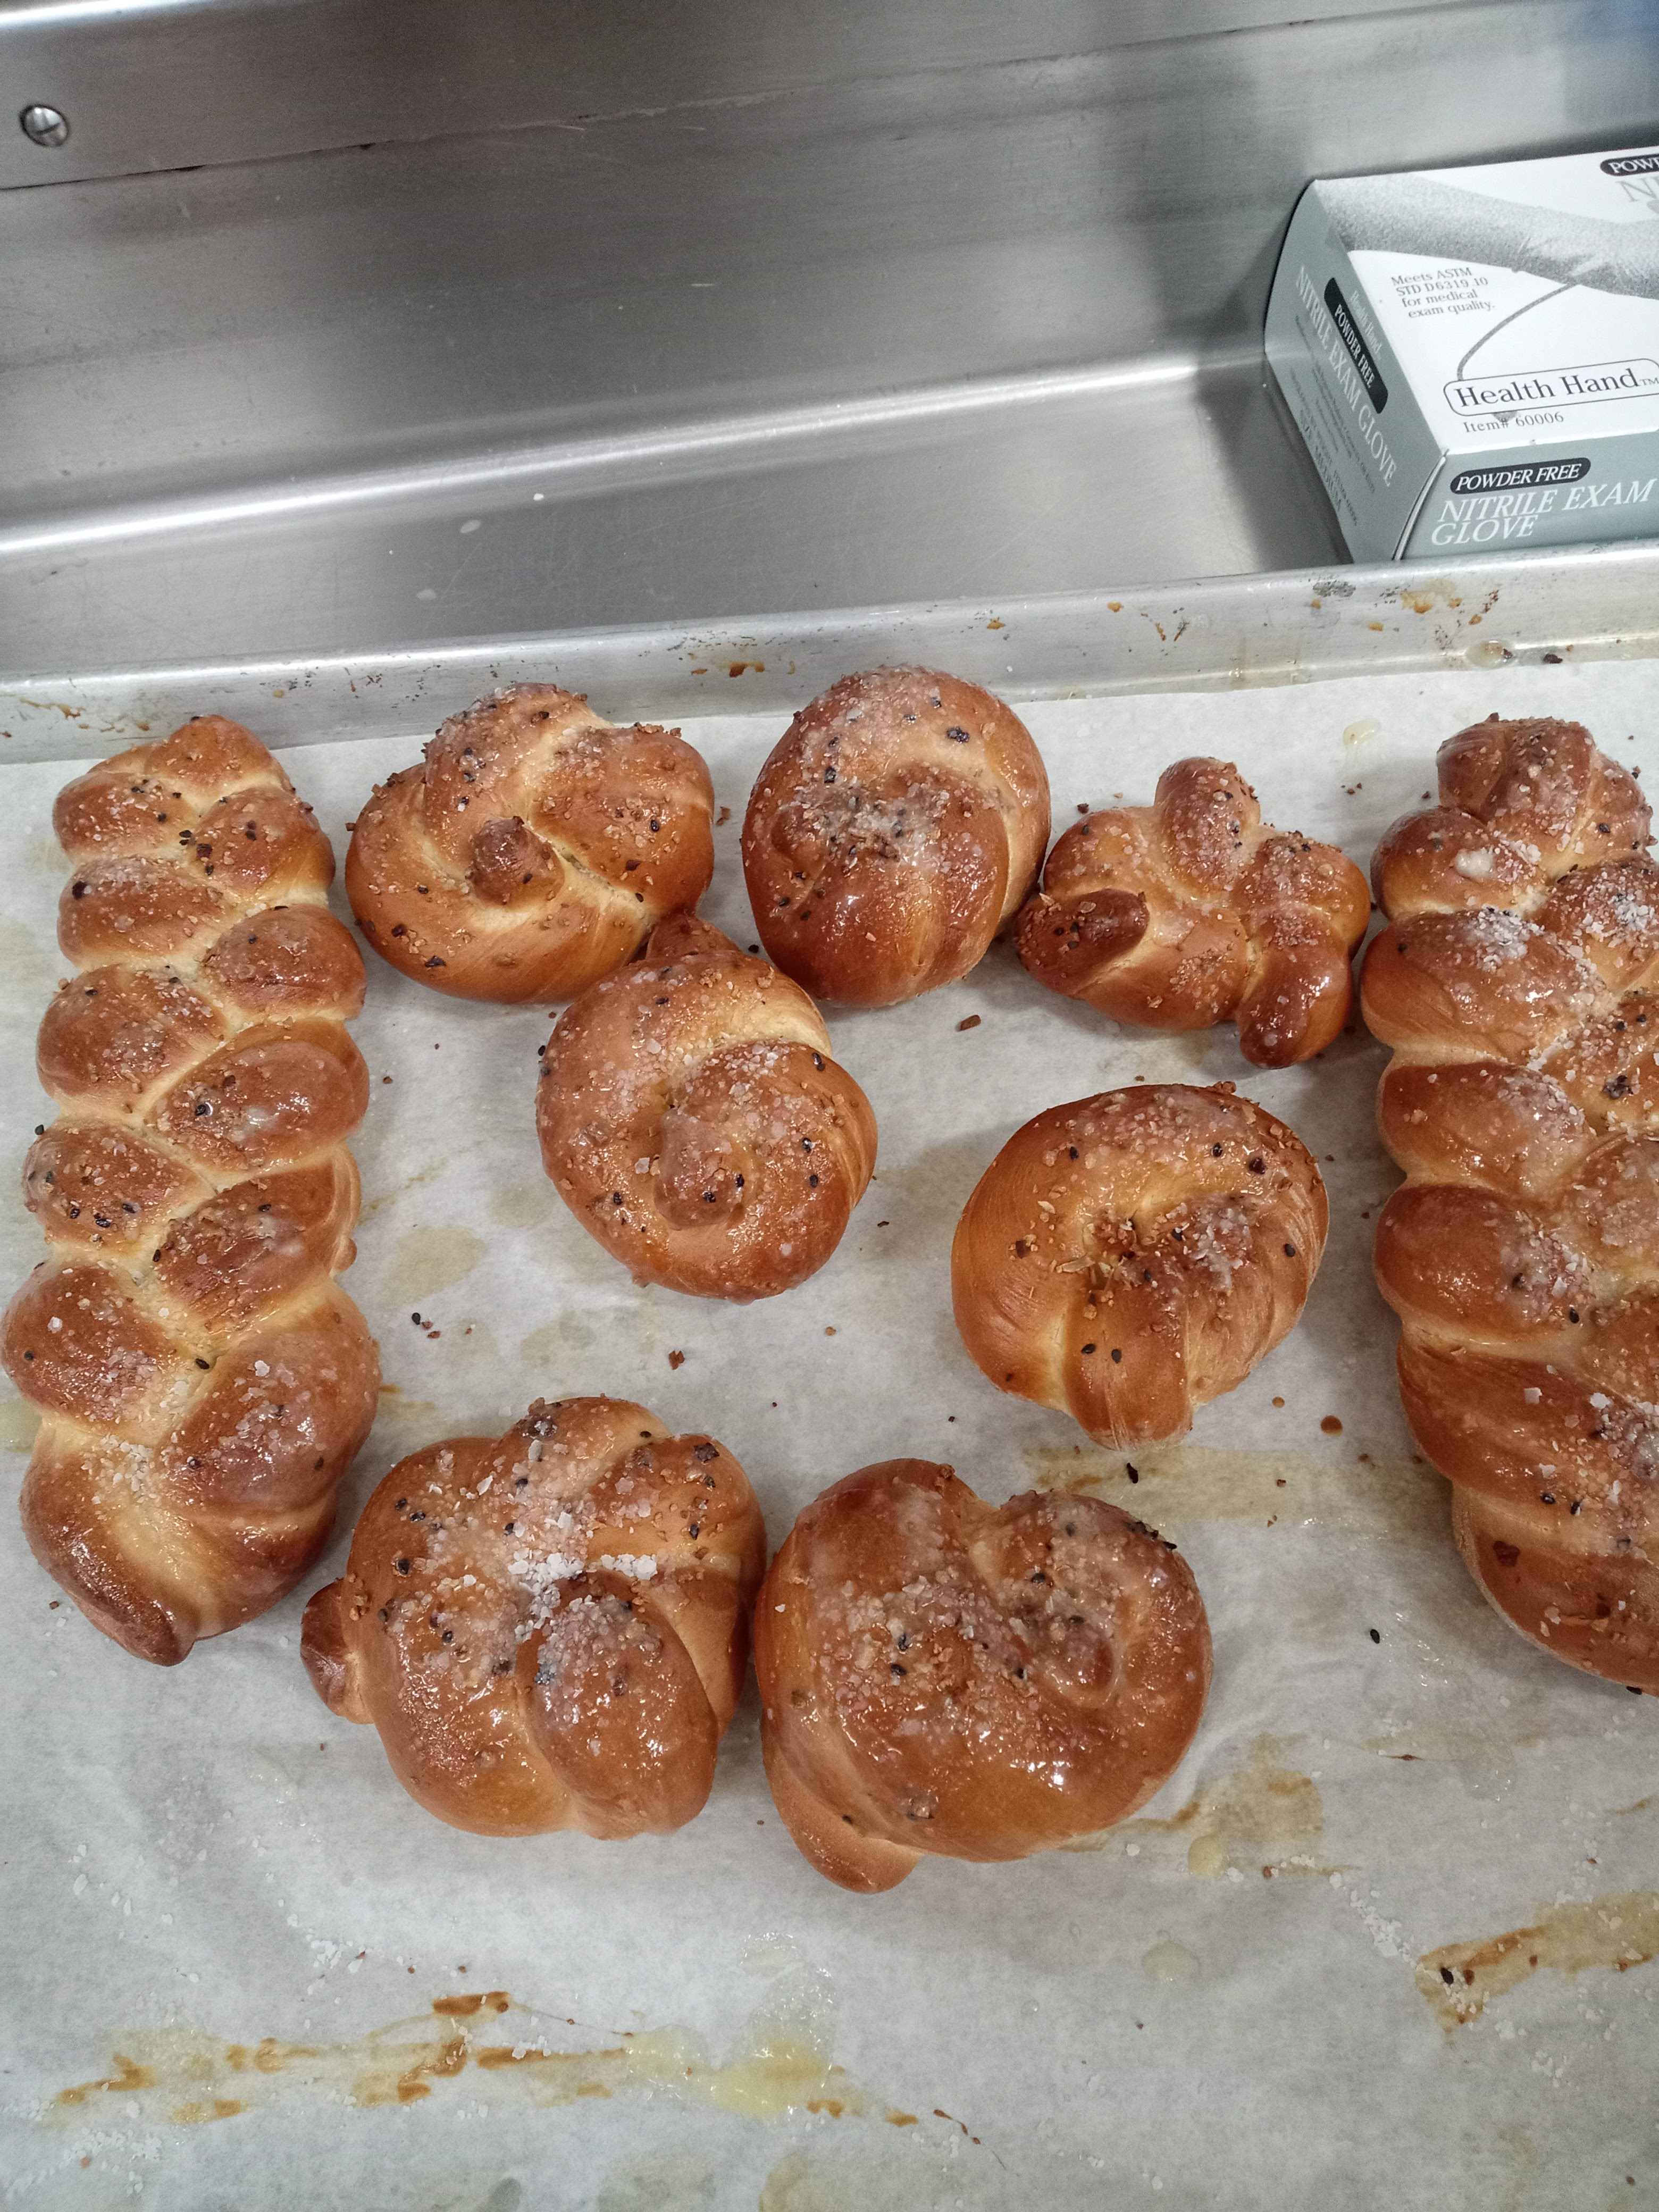 two braided bread loaves and several knotted bread rolls all salted and golden brown on top of a parchment paper covered baking sheet